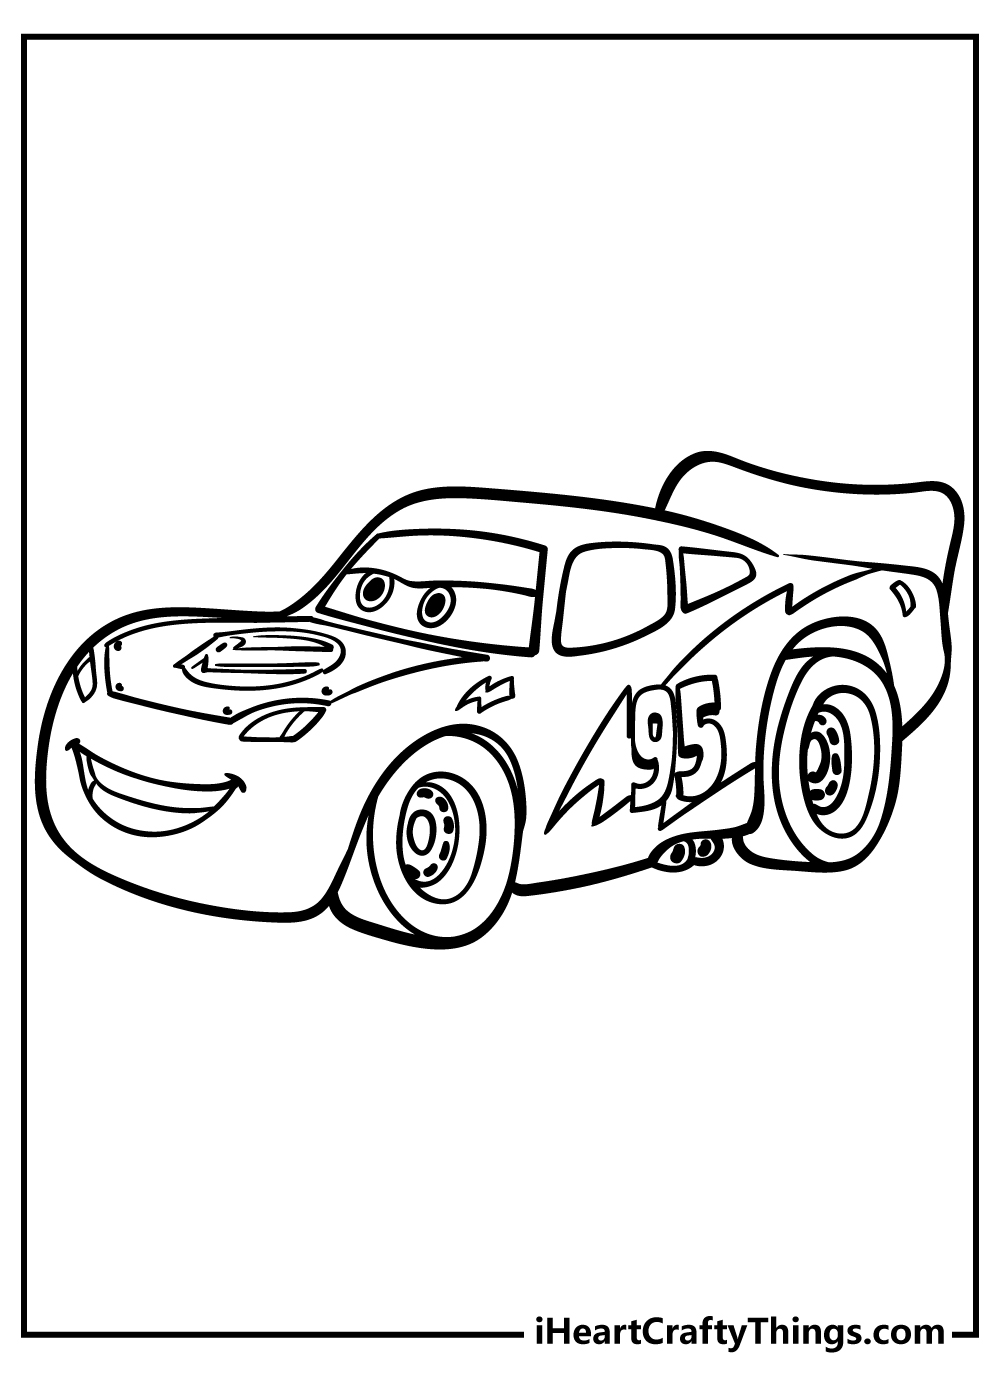 Lightning McQueen Coloring Book for adults free download